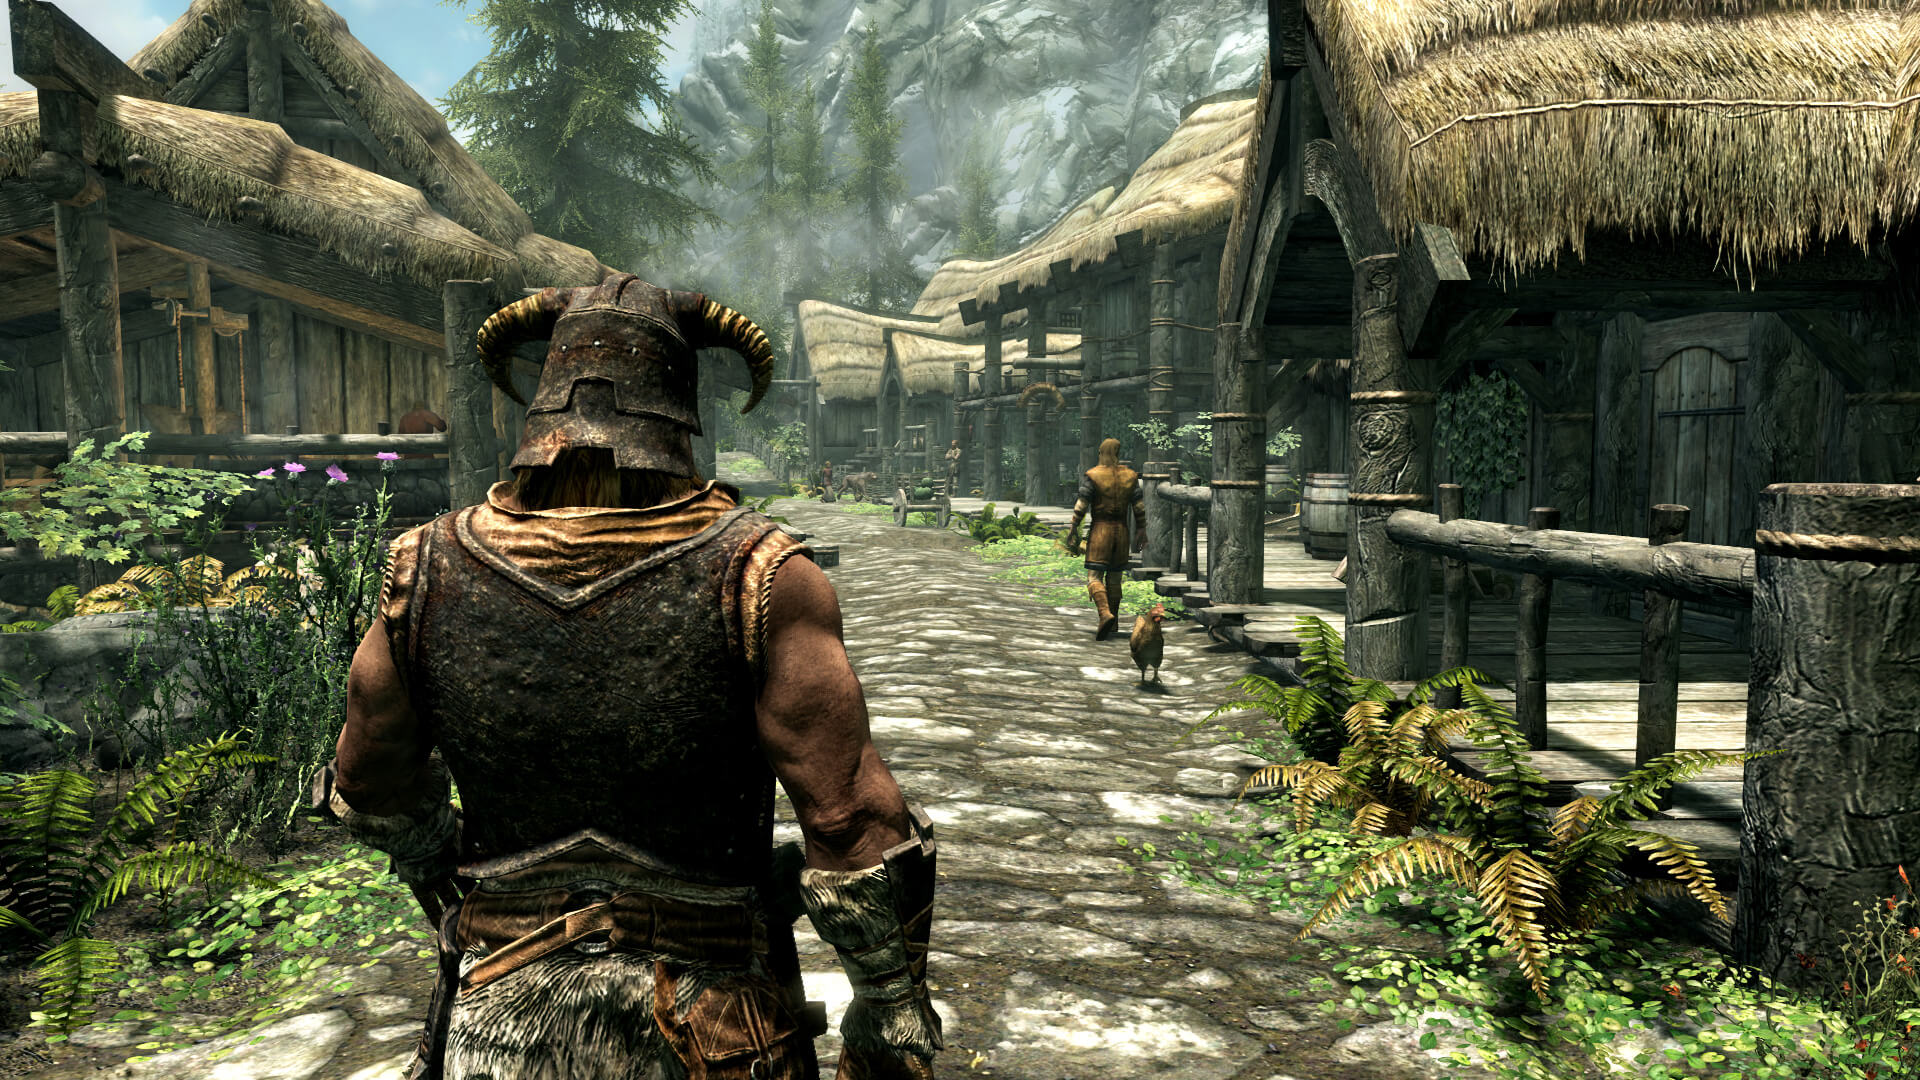 The player walking through a village in Skyrim, which re-entered the NPD Group's gaming chart at number 20 in May